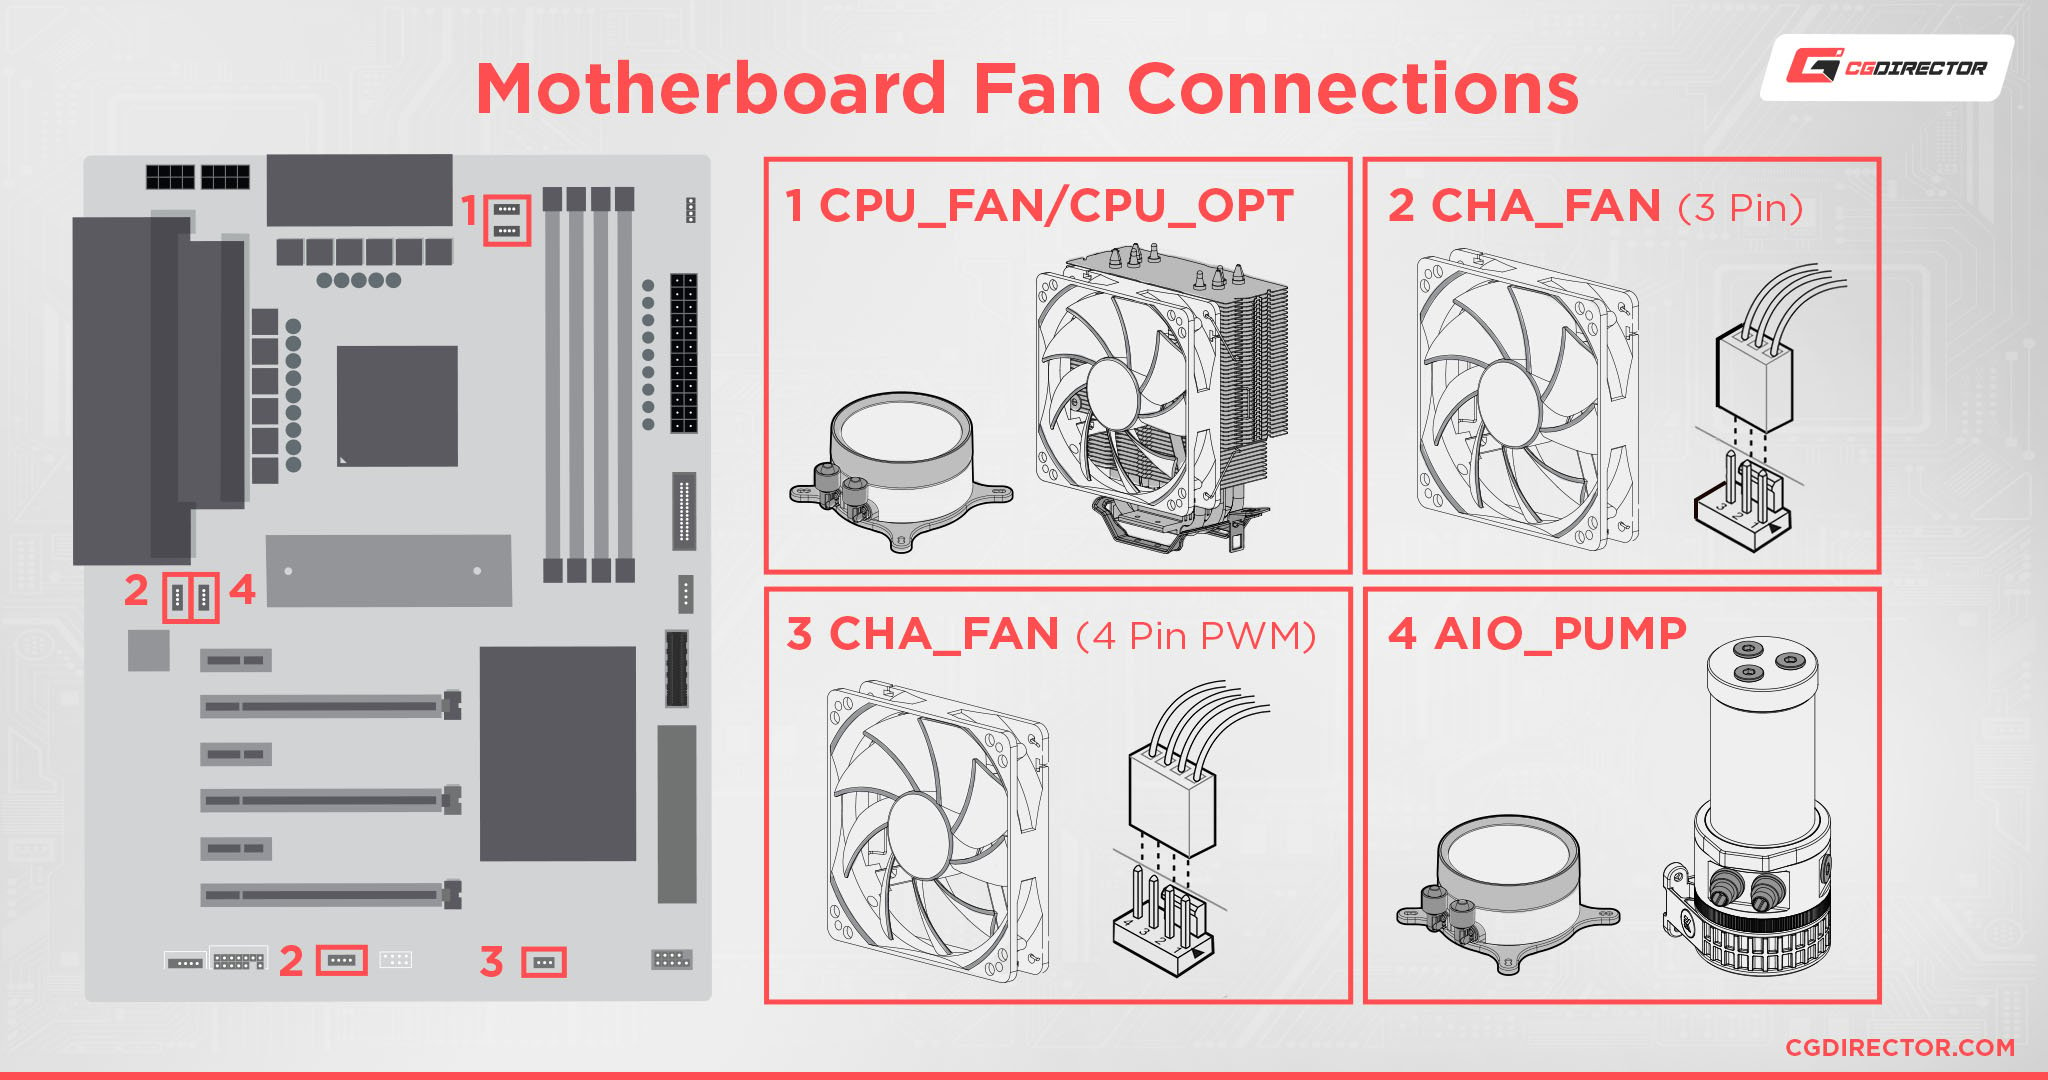 Motherboard Fan Connections